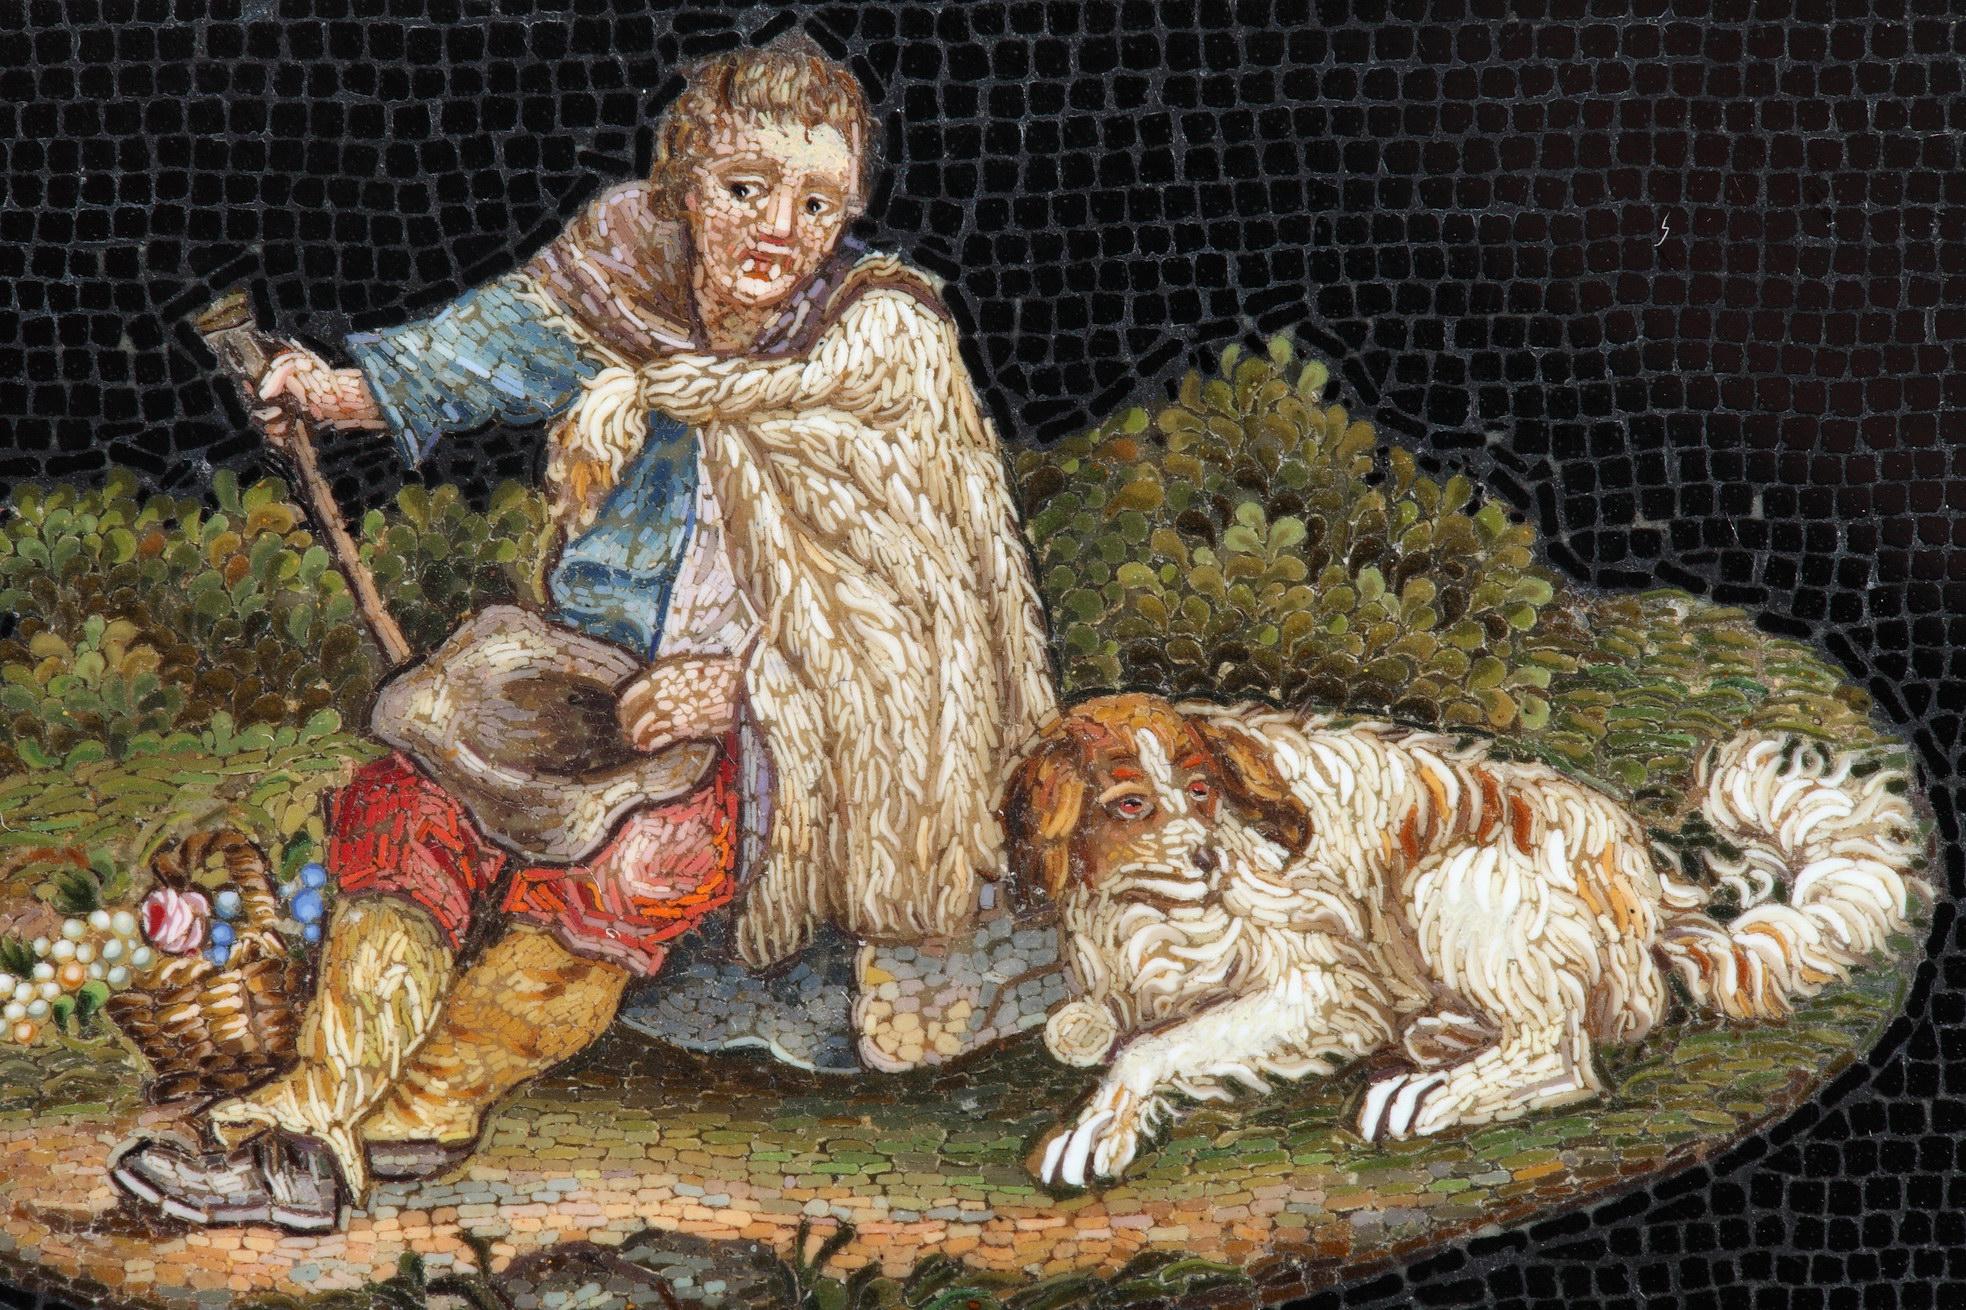 Rectangular micromosaic plate featuring a shepherd, seated and resting with his dog at his feet. The shepherd is wearing a woolen cloak over his colorful clothes. He is holding a hat in his left hand and his staff in his right. A wicker basket at